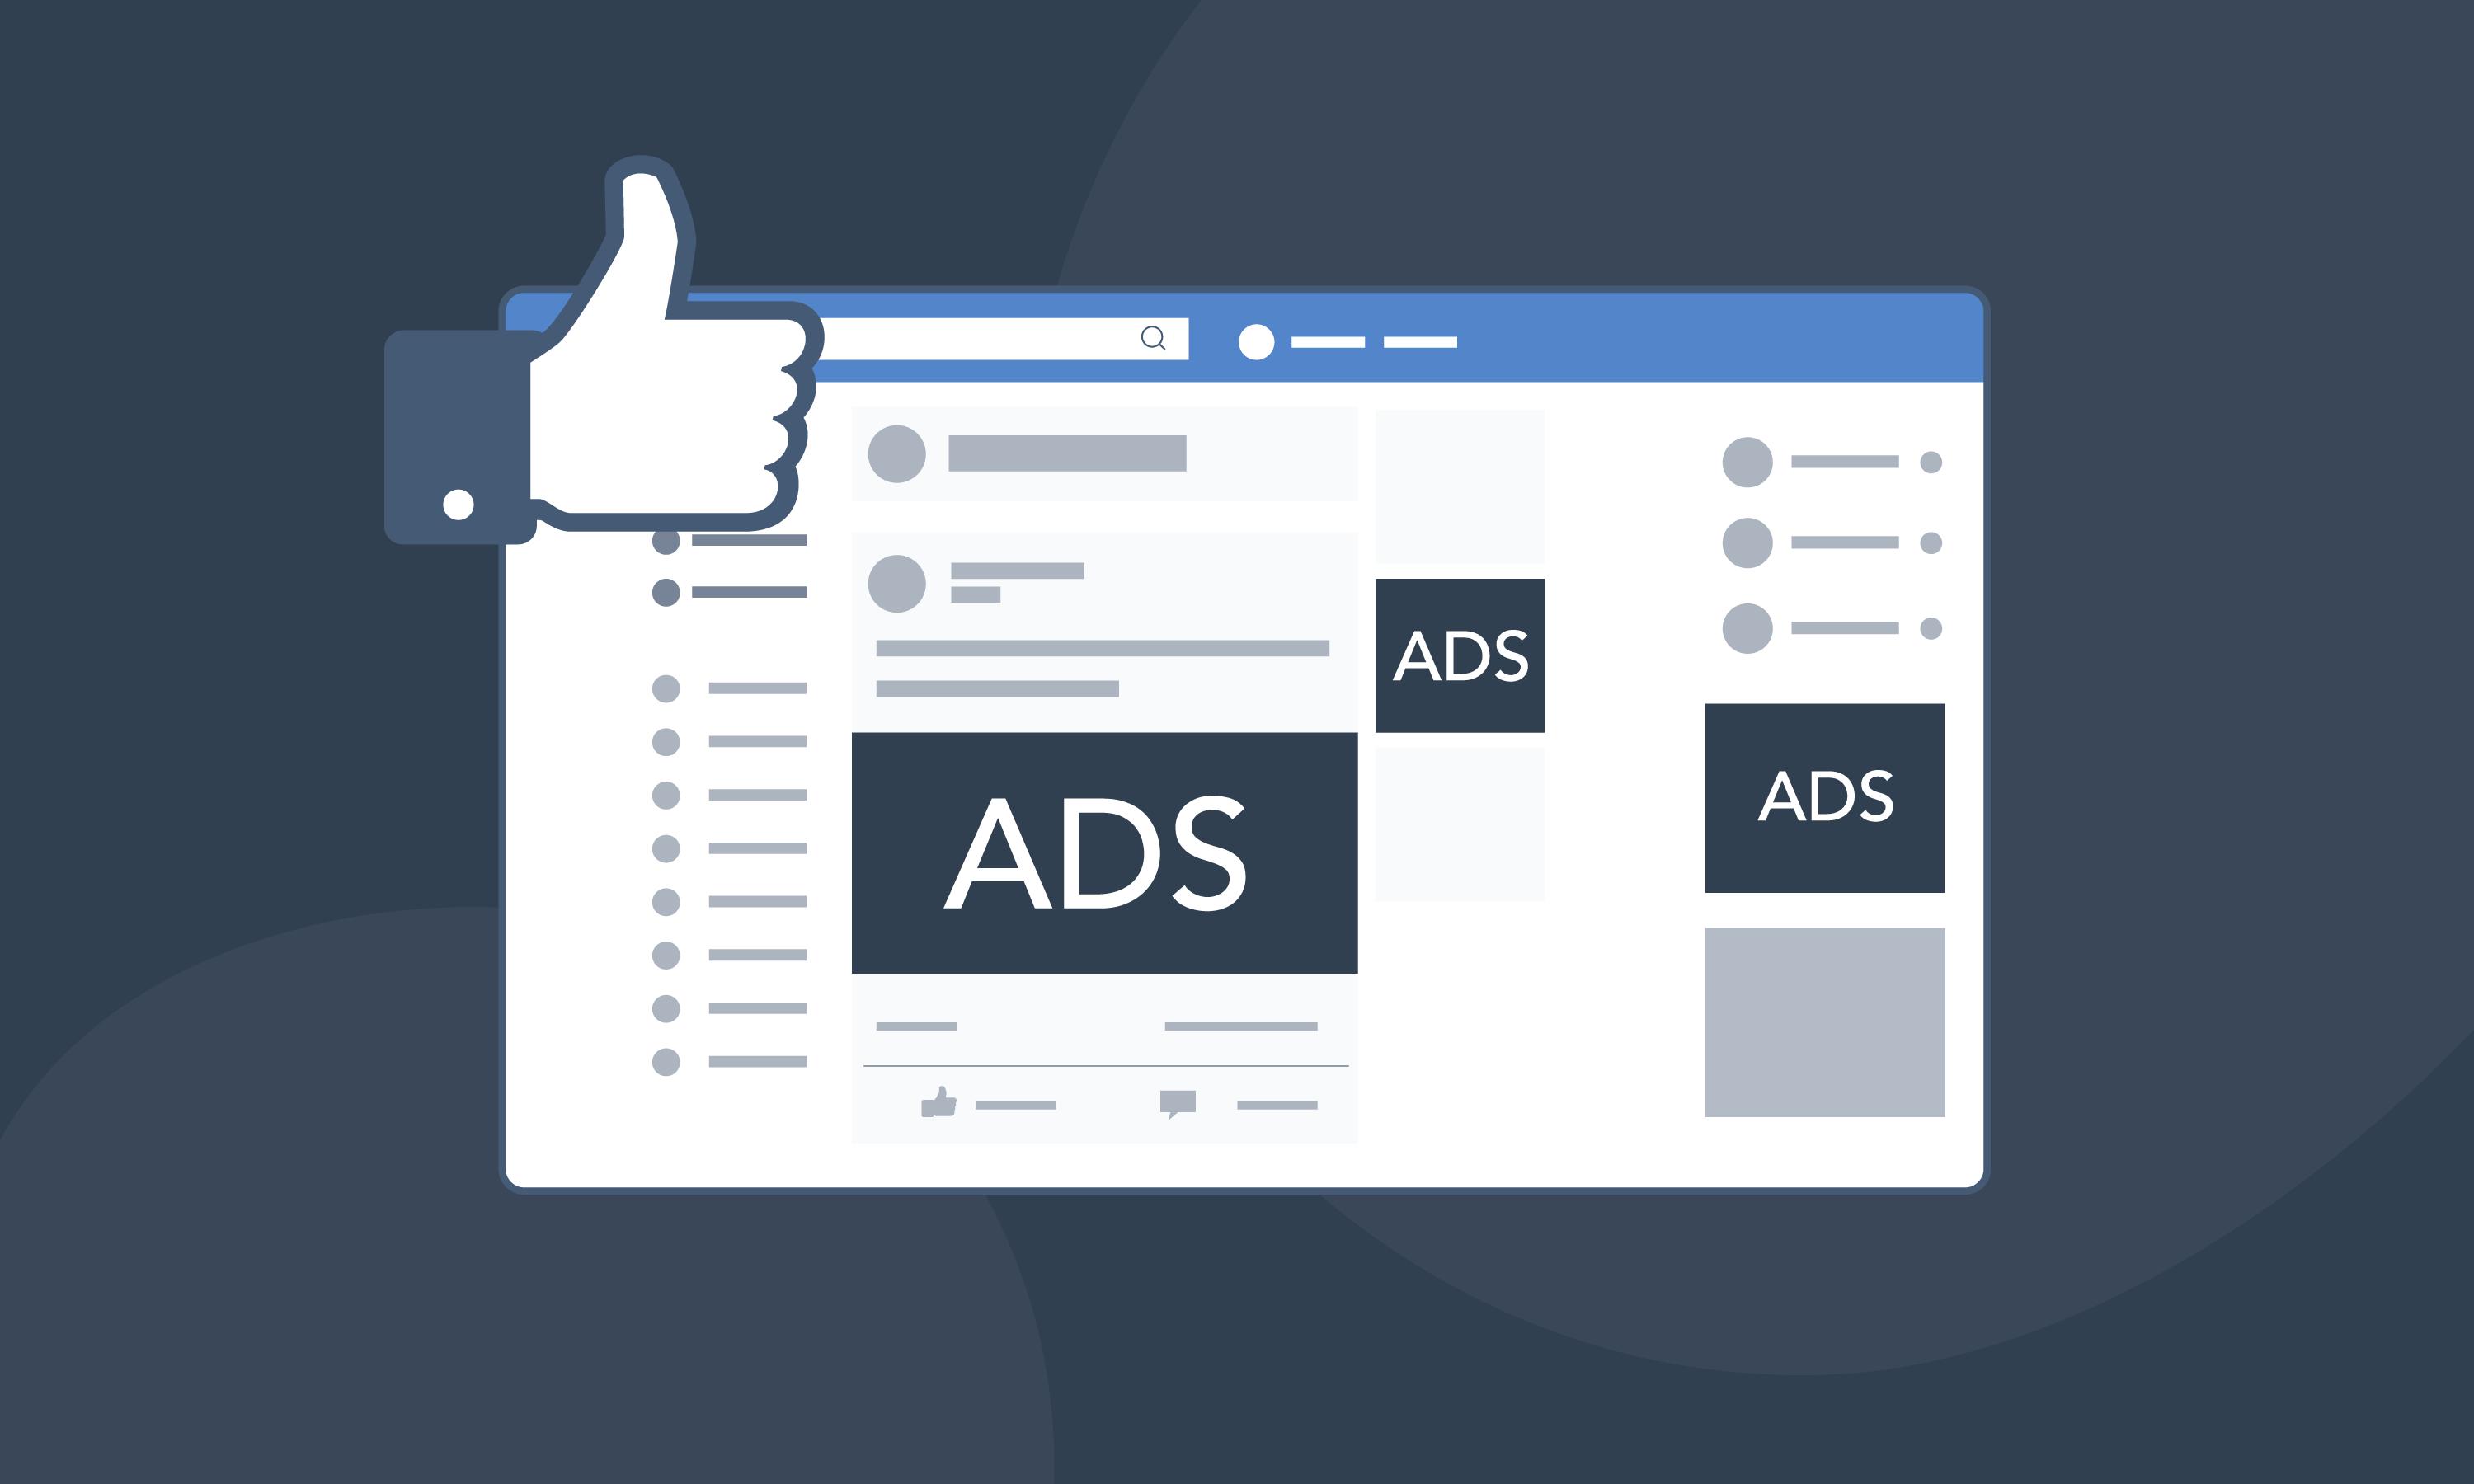 Facebook Ads: The best types of Facebook ads - and how to use them